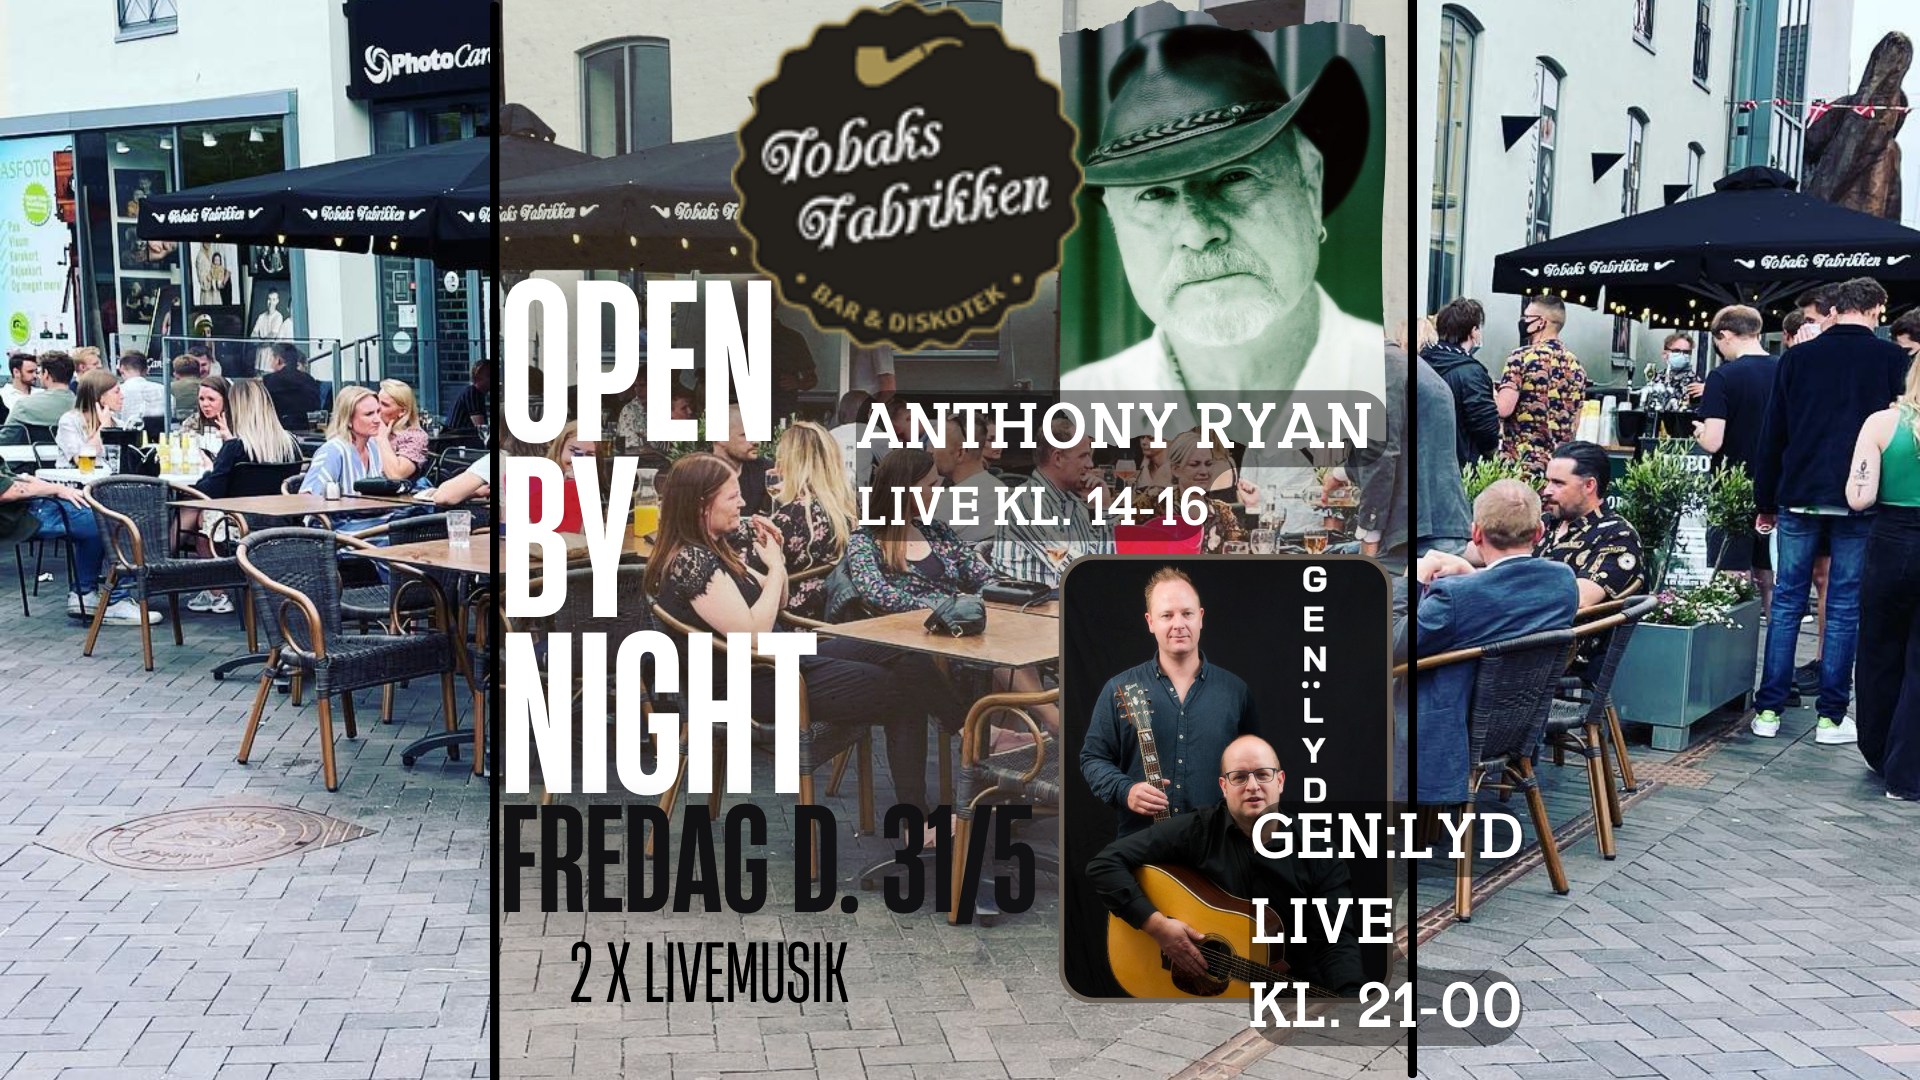 OPEN BY NIGHT - 2 X LIVEMUSIK